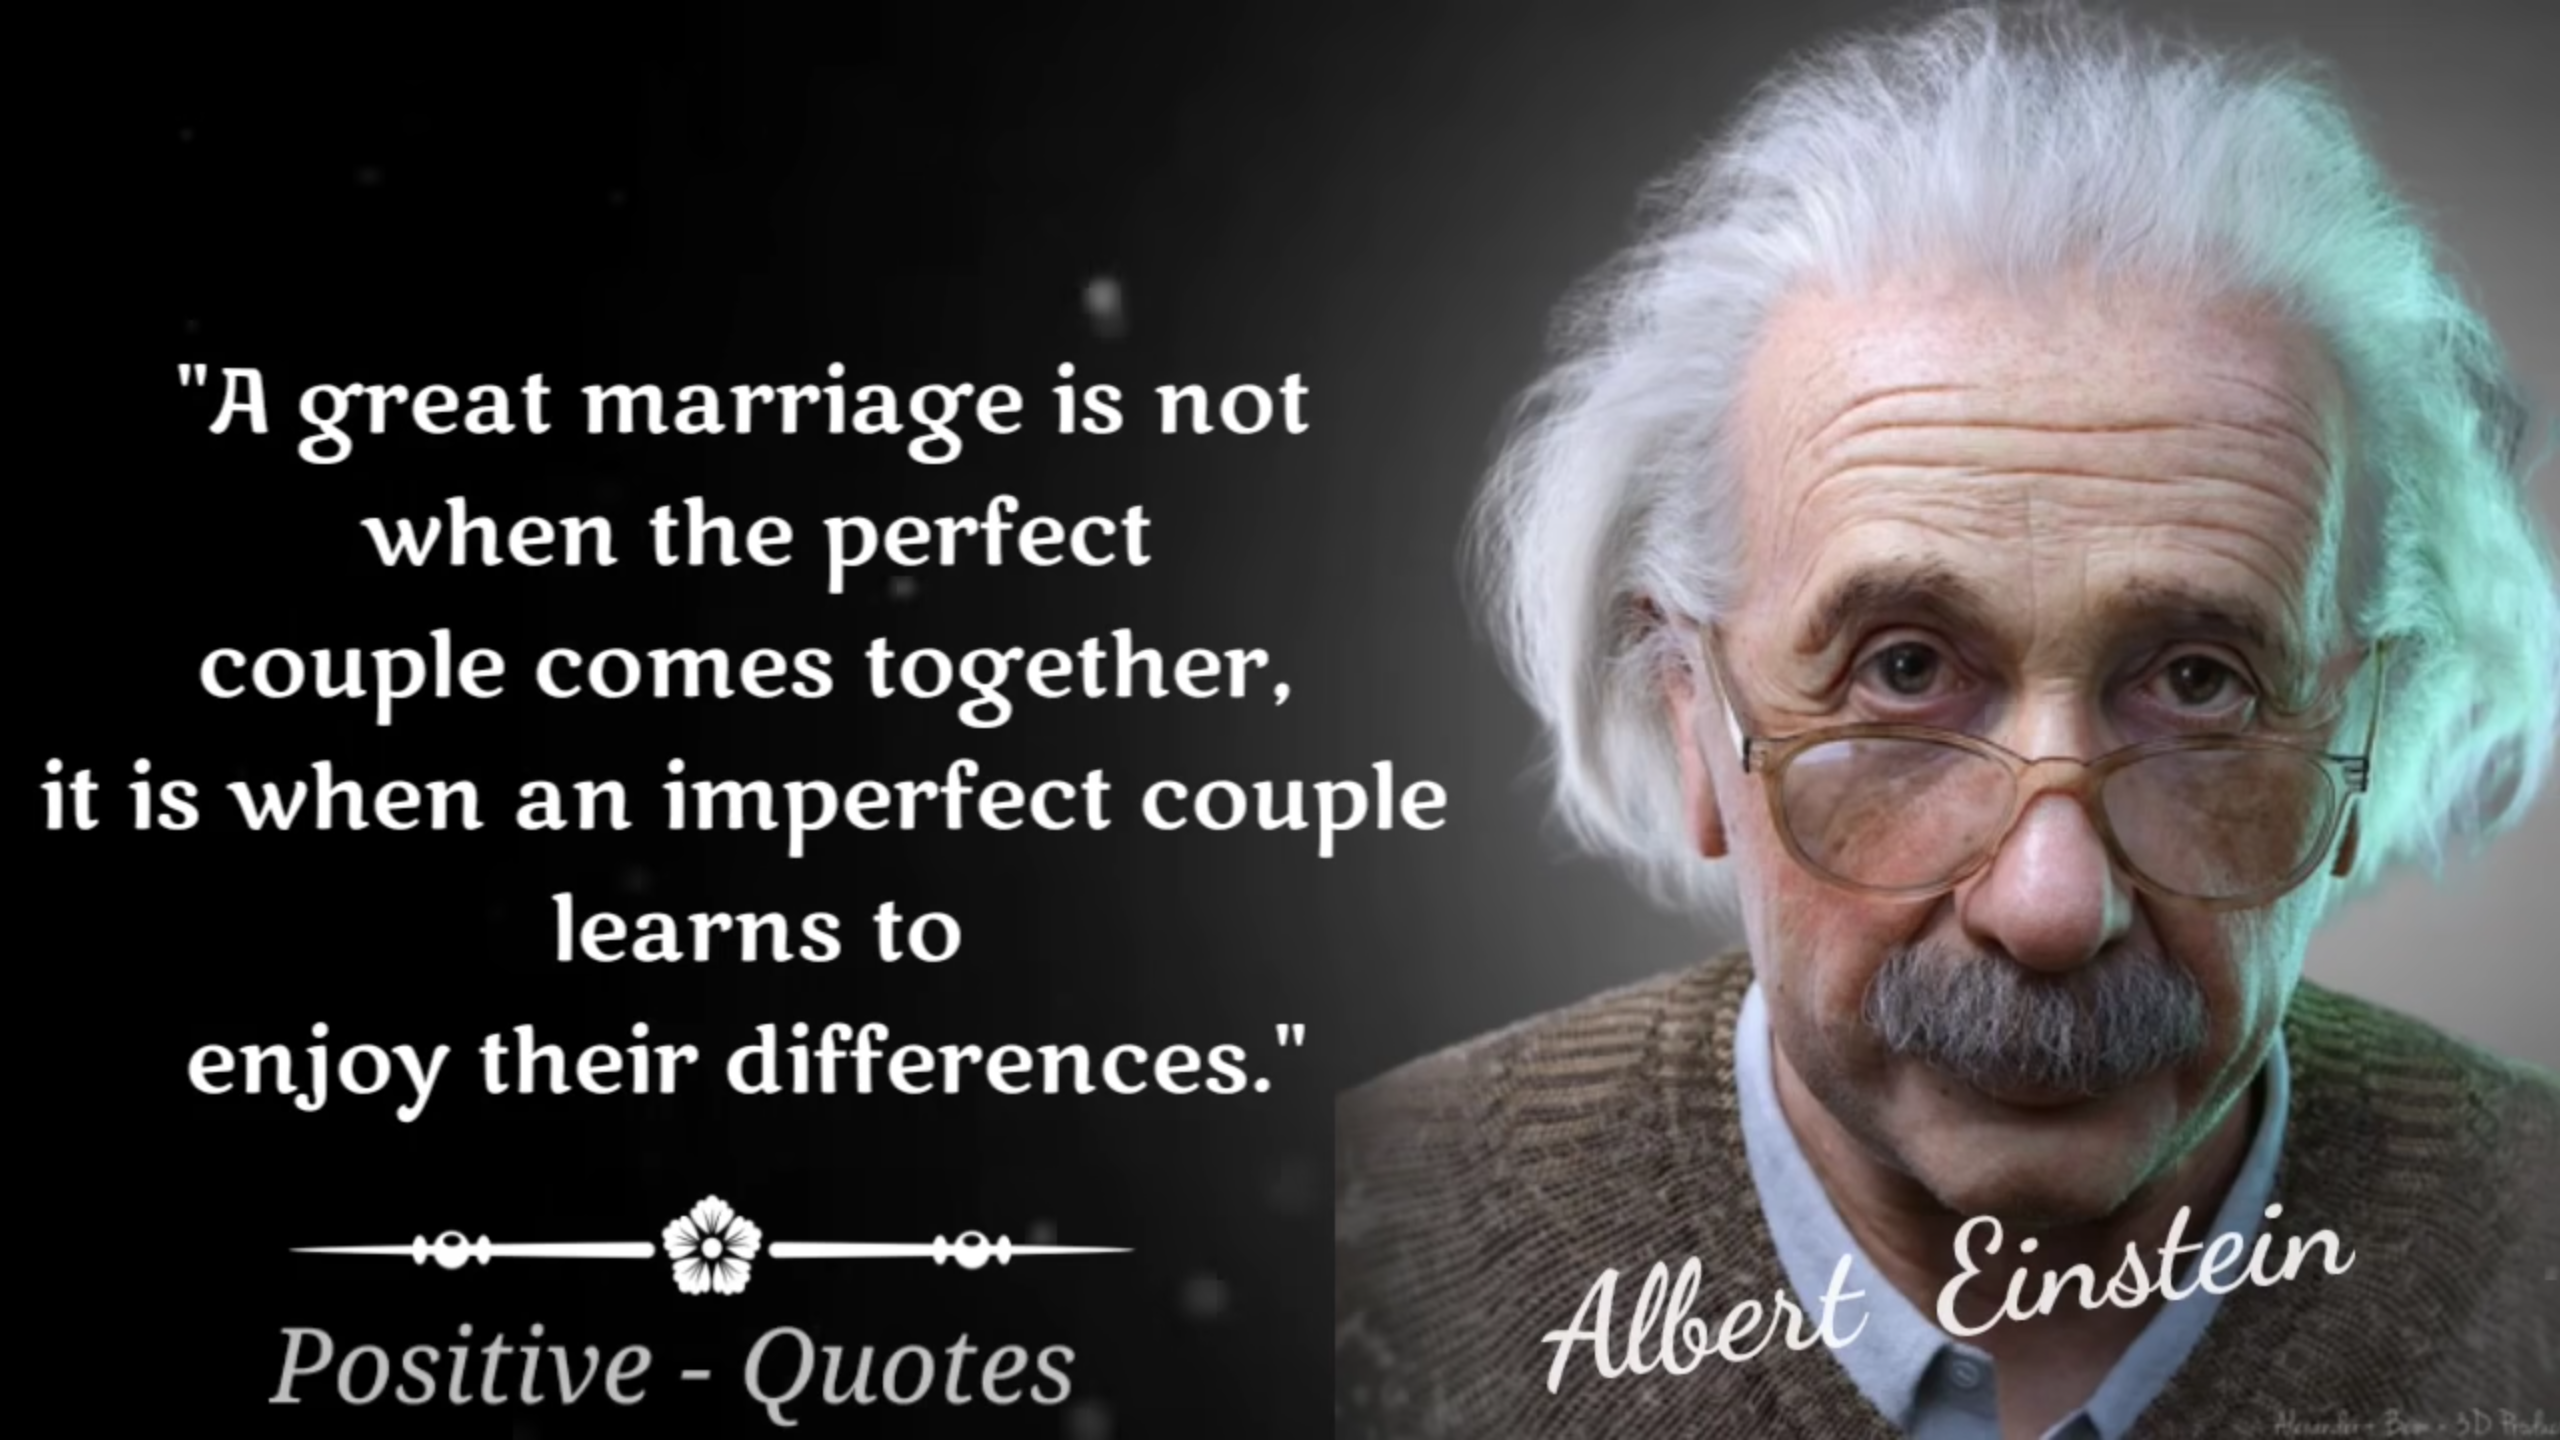 Love and marriage